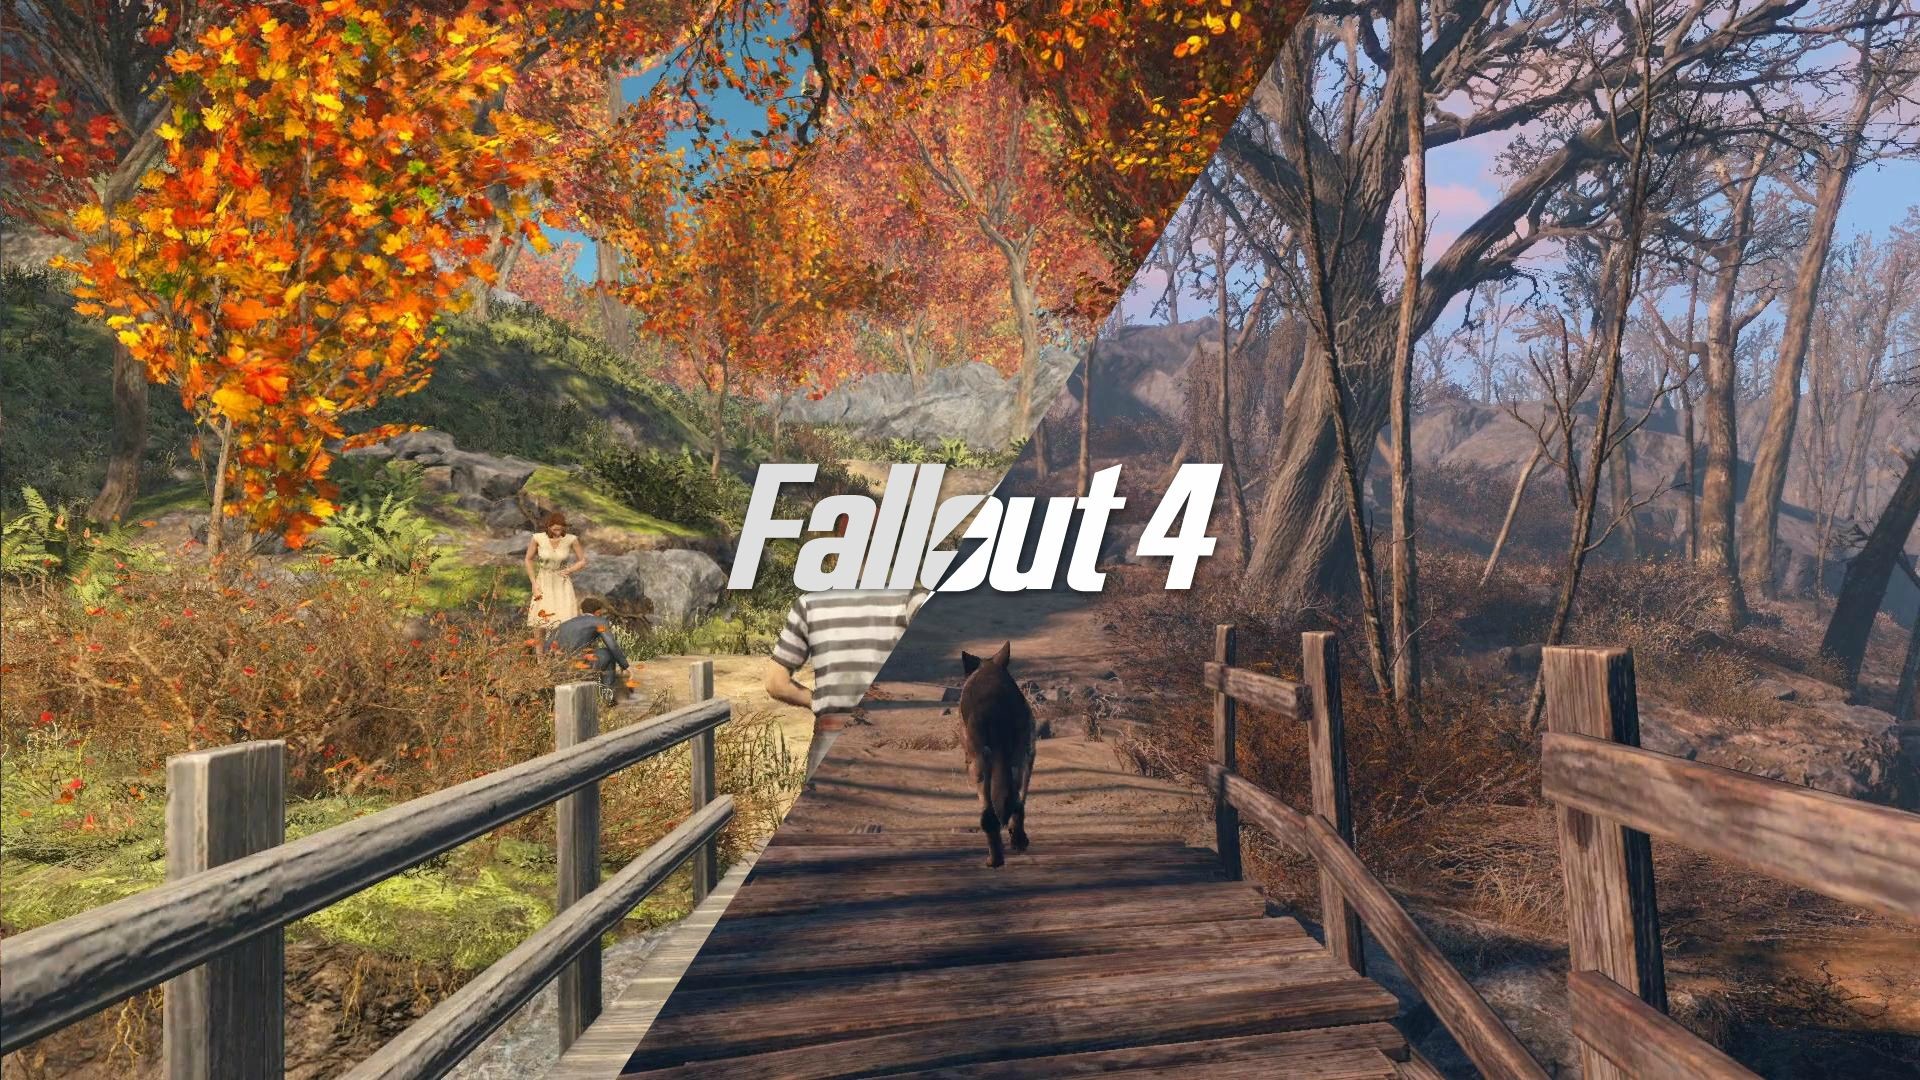 1920x1080 Fallout 4 new wallpapers